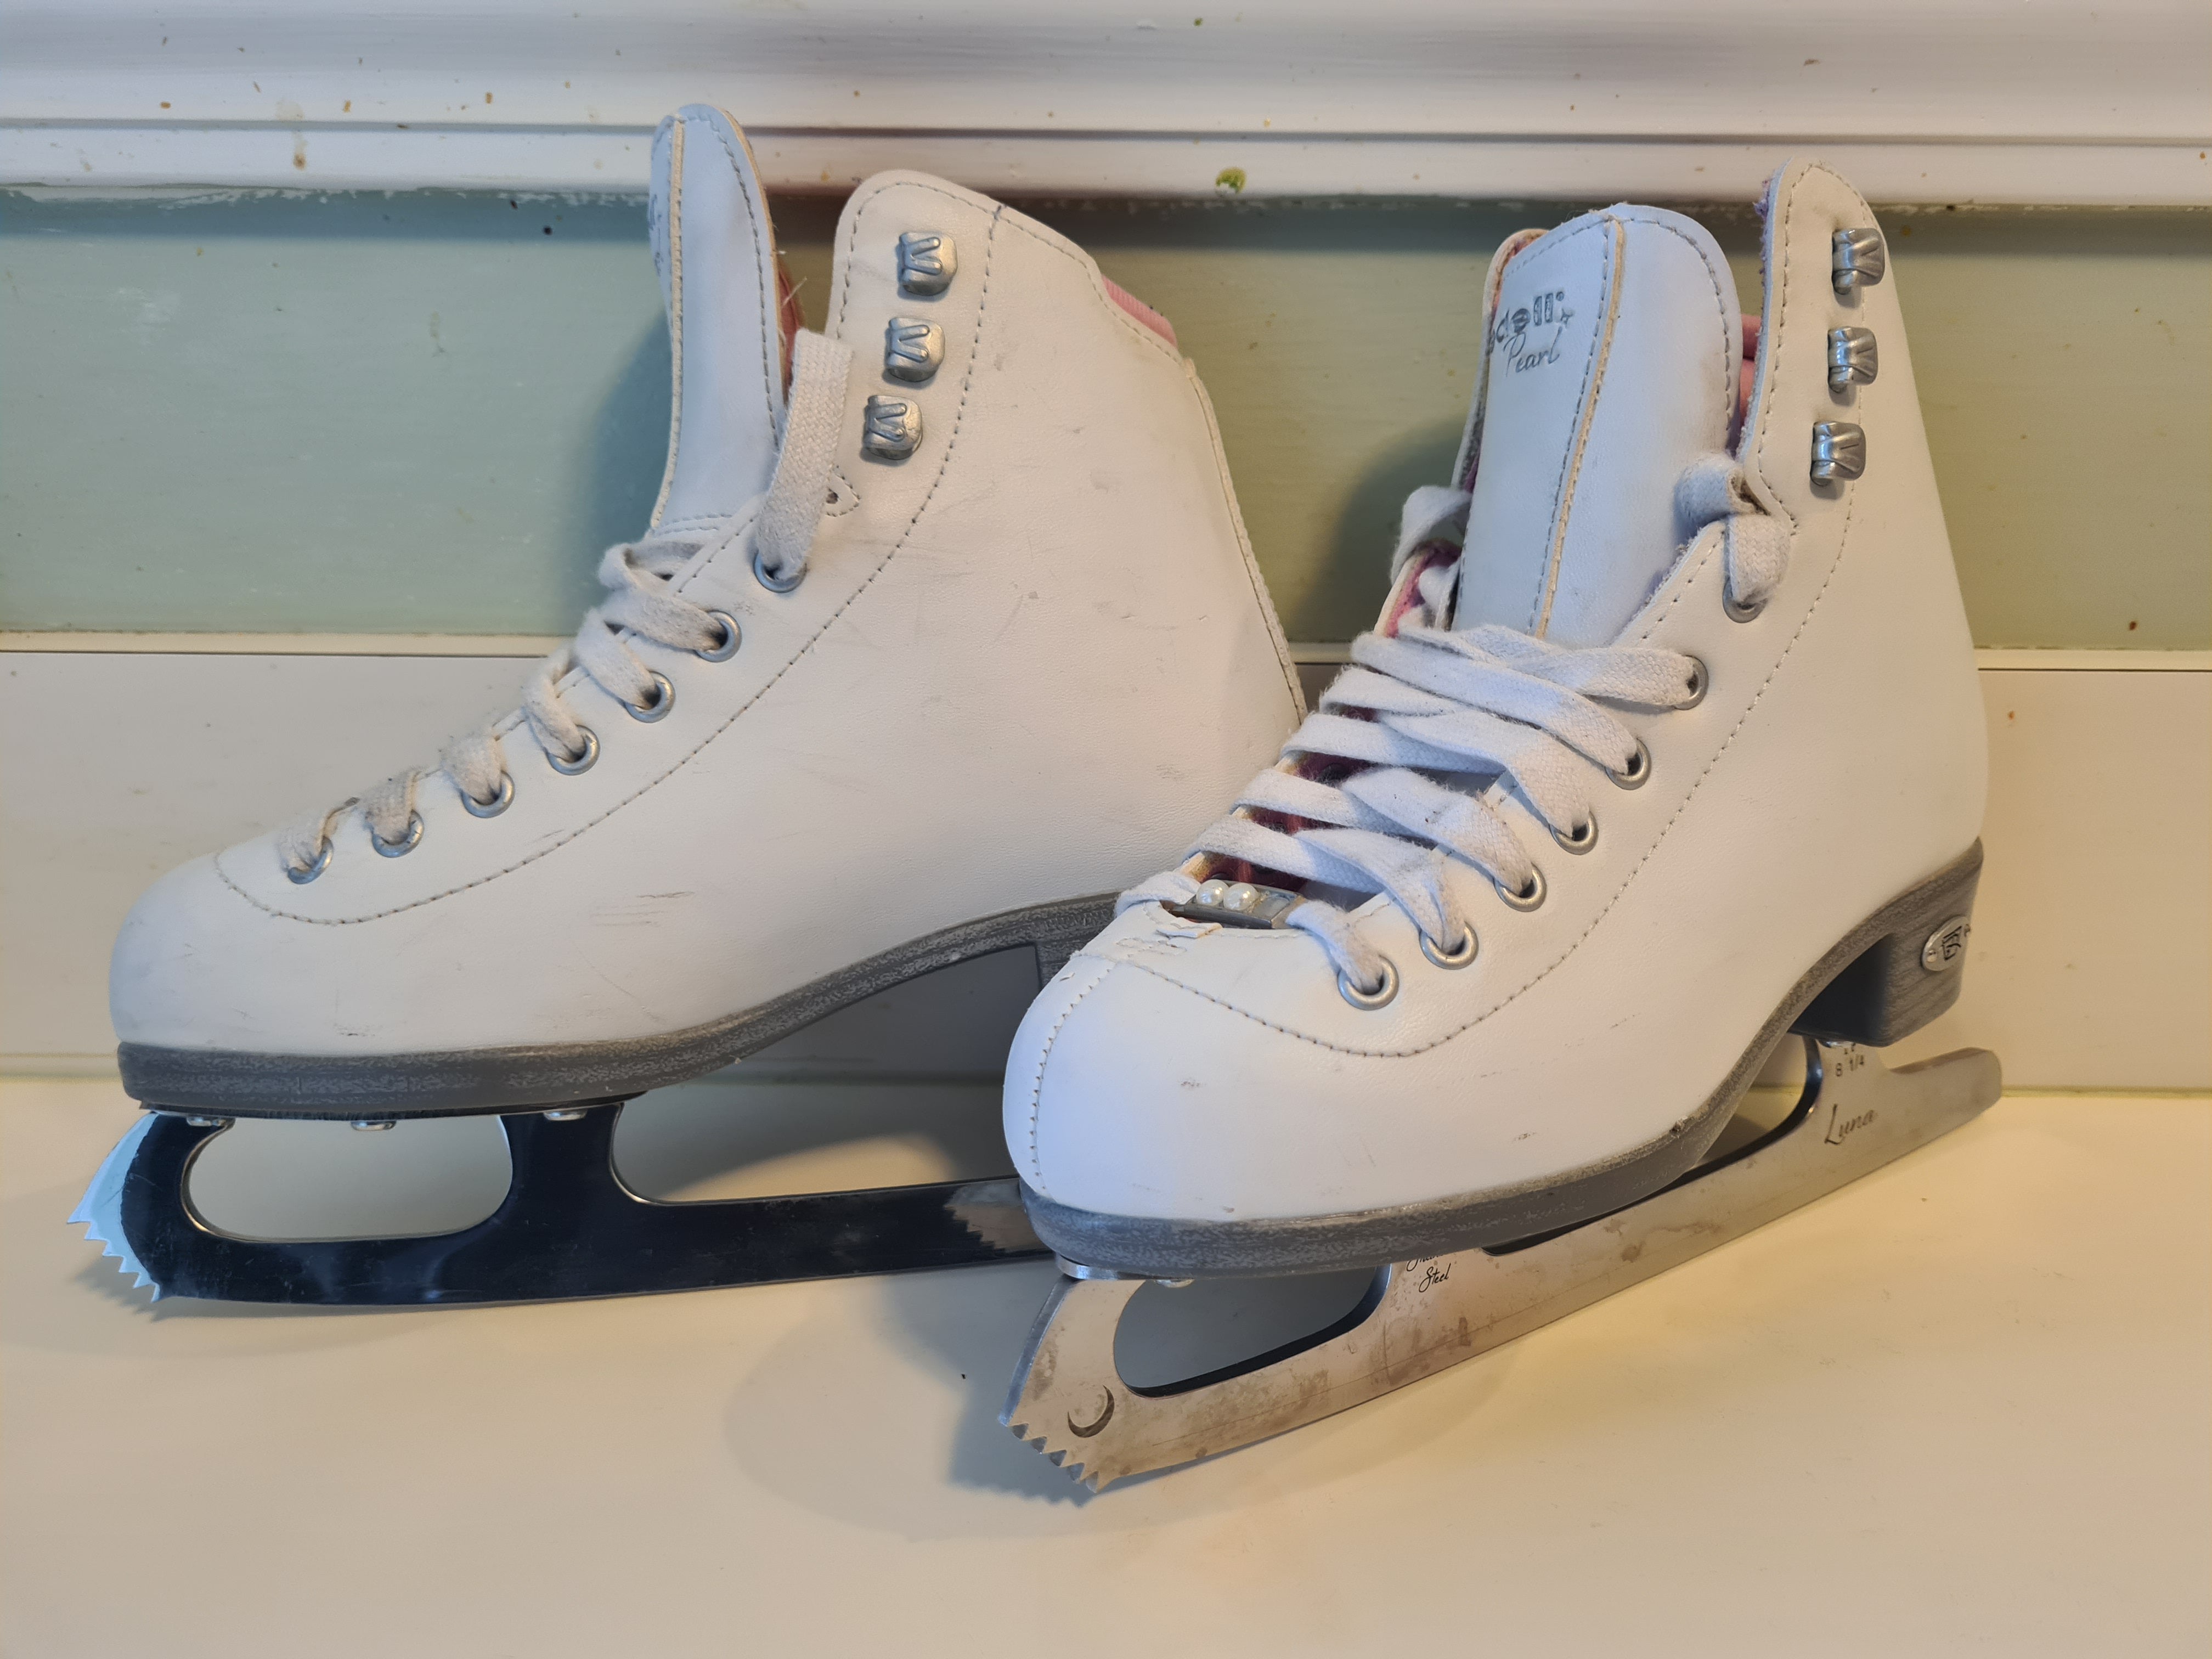 Riedell model 29 Figure Skates sizes 1 and 2 NEW 